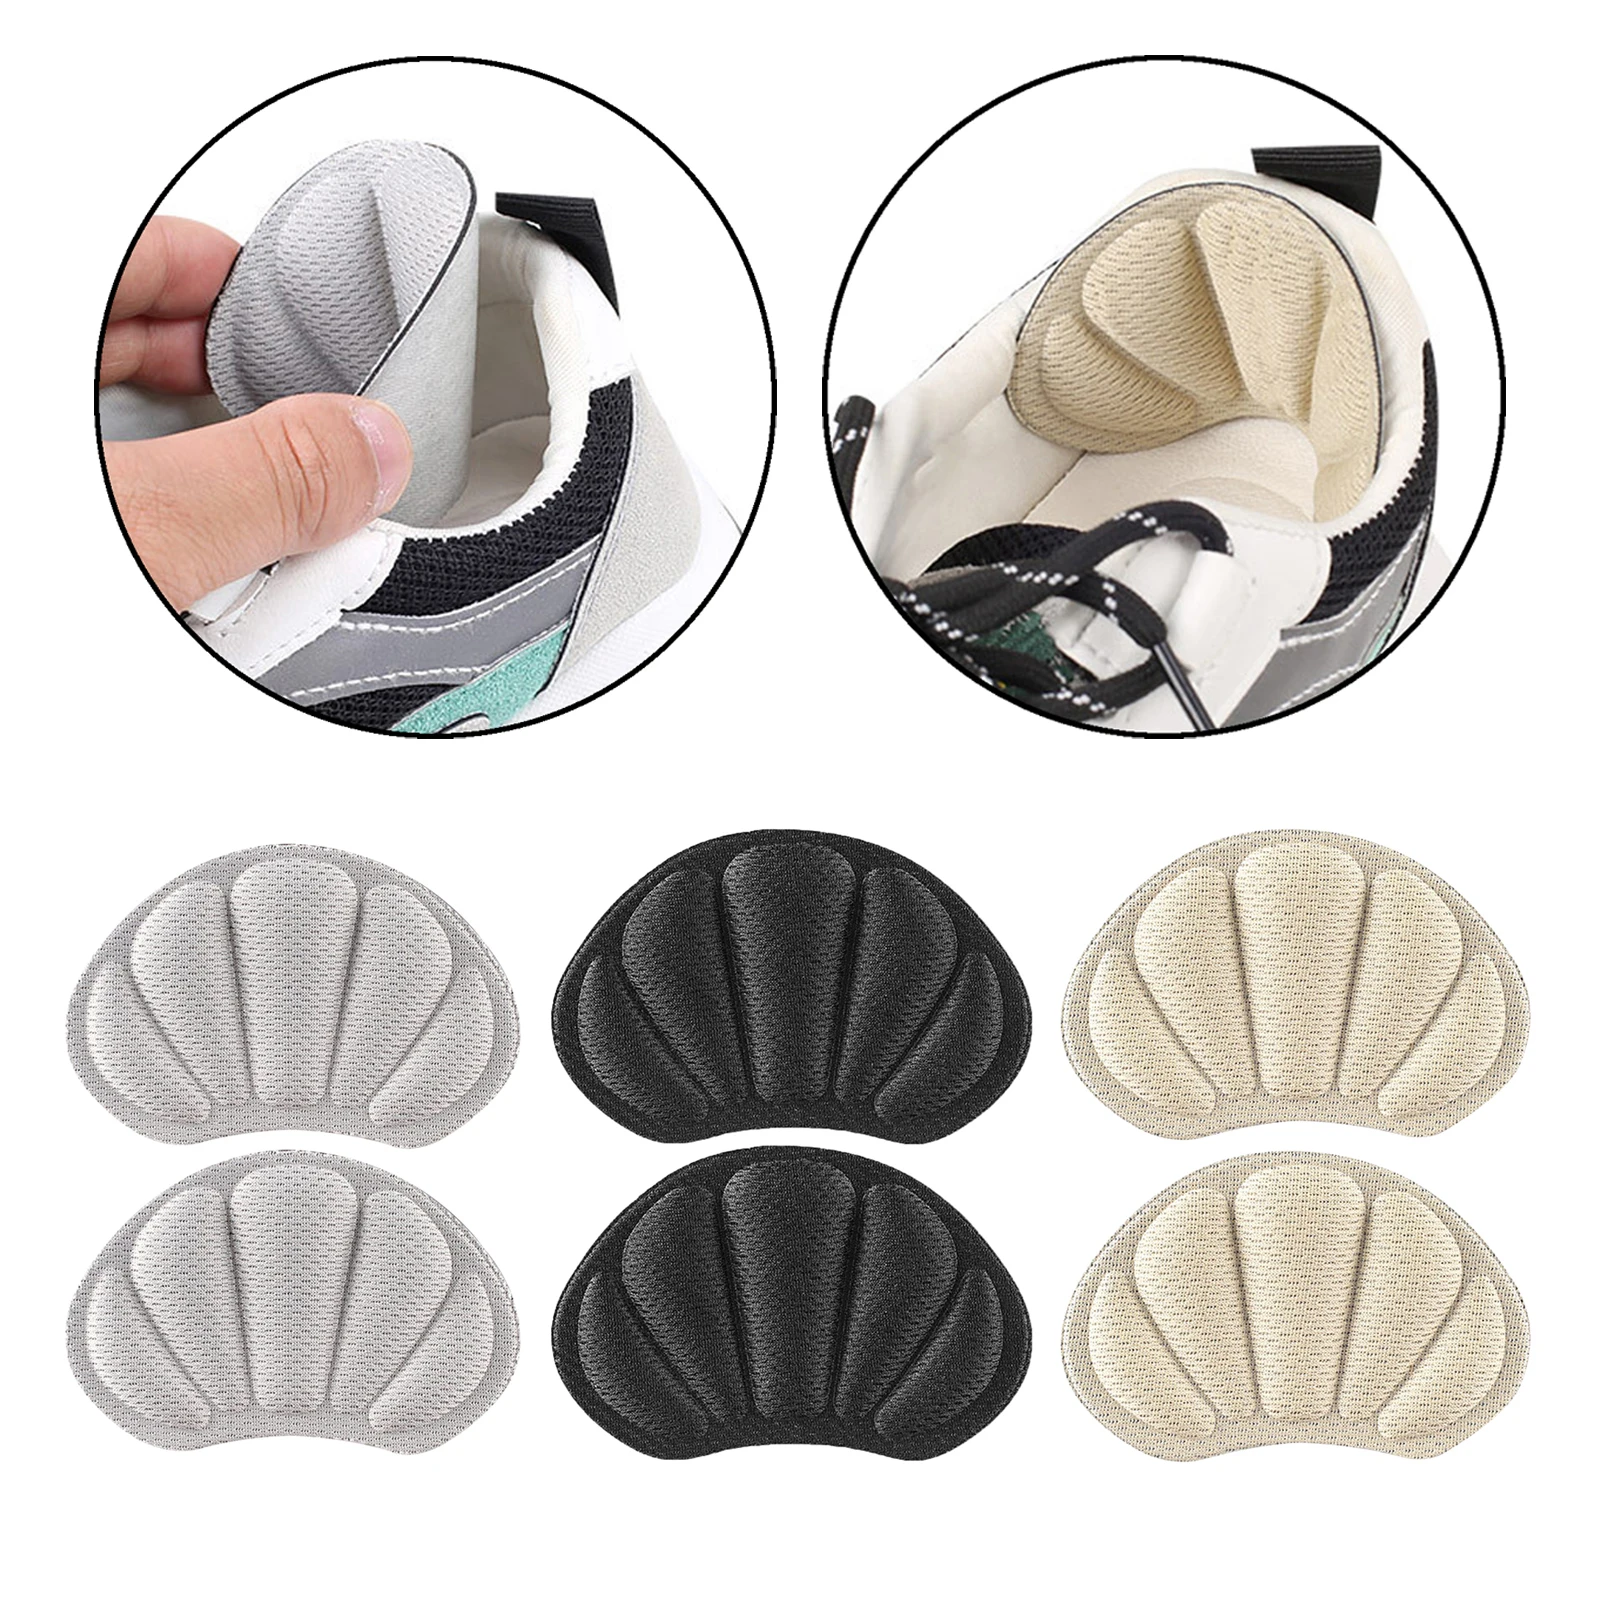 

Shoe Heel Sticker Insoles for Sneakers Running Shoes Patch Size Reducer Heel Pads Liner Grips Protector Pad Pain Relief Inserts